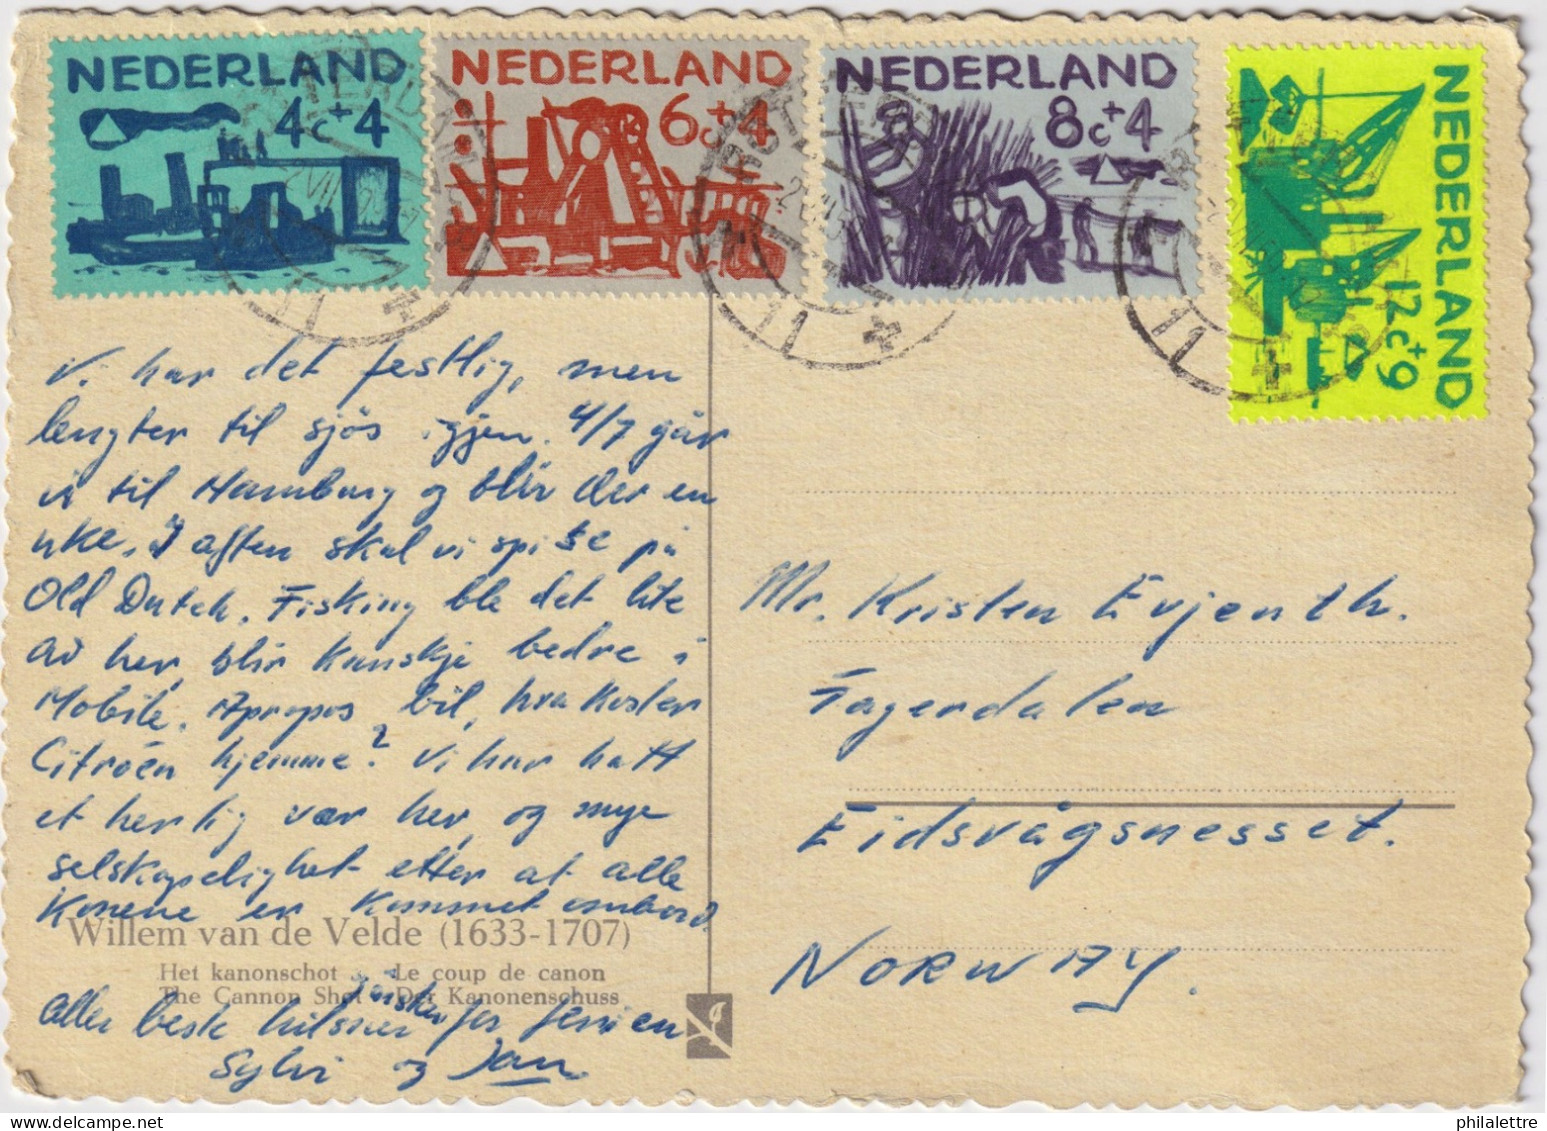 PAYS-BAS / THE NETHERLANDS - 1959 Mi.730, 731, 732 & 733 On Card From ROTTERDAM To EIDSVAG, MESSET, Norway - Briefe U. Dokumente